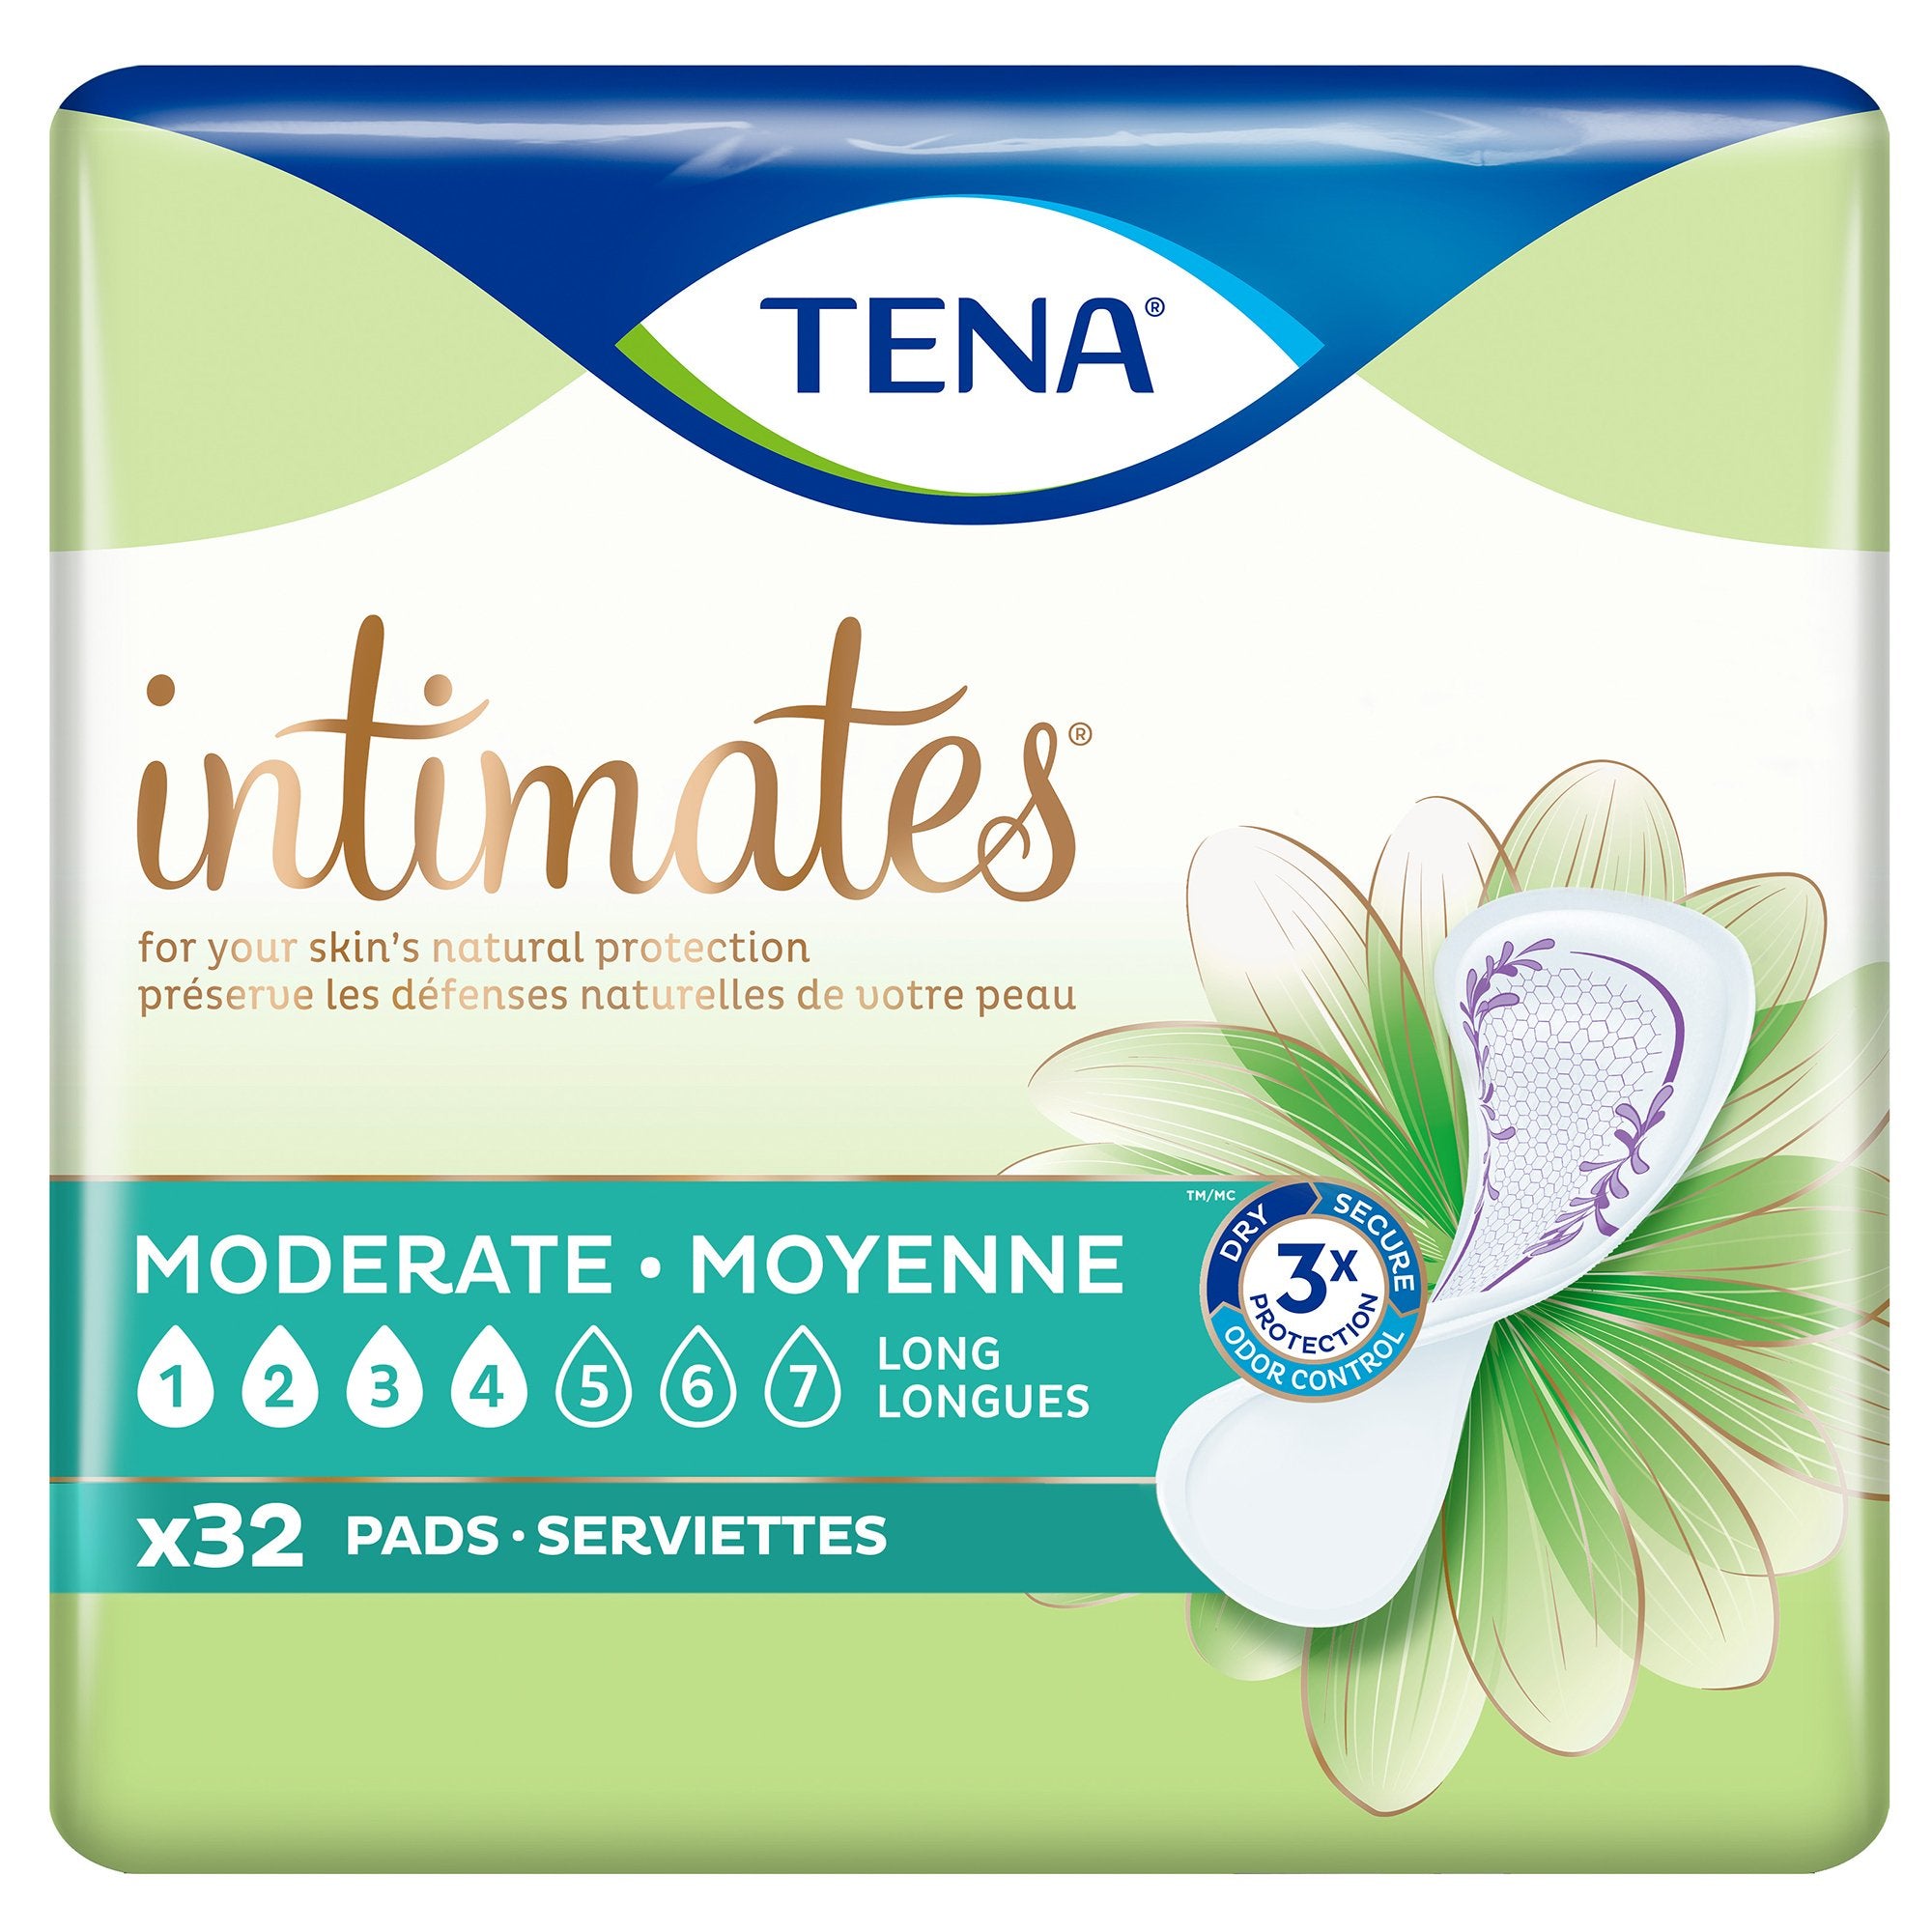 Bladder Control Pad TENA Intimates Moderate Thin 13 Inch Length Moderate Absorbency Dry-Fast Core One Size Fits Most